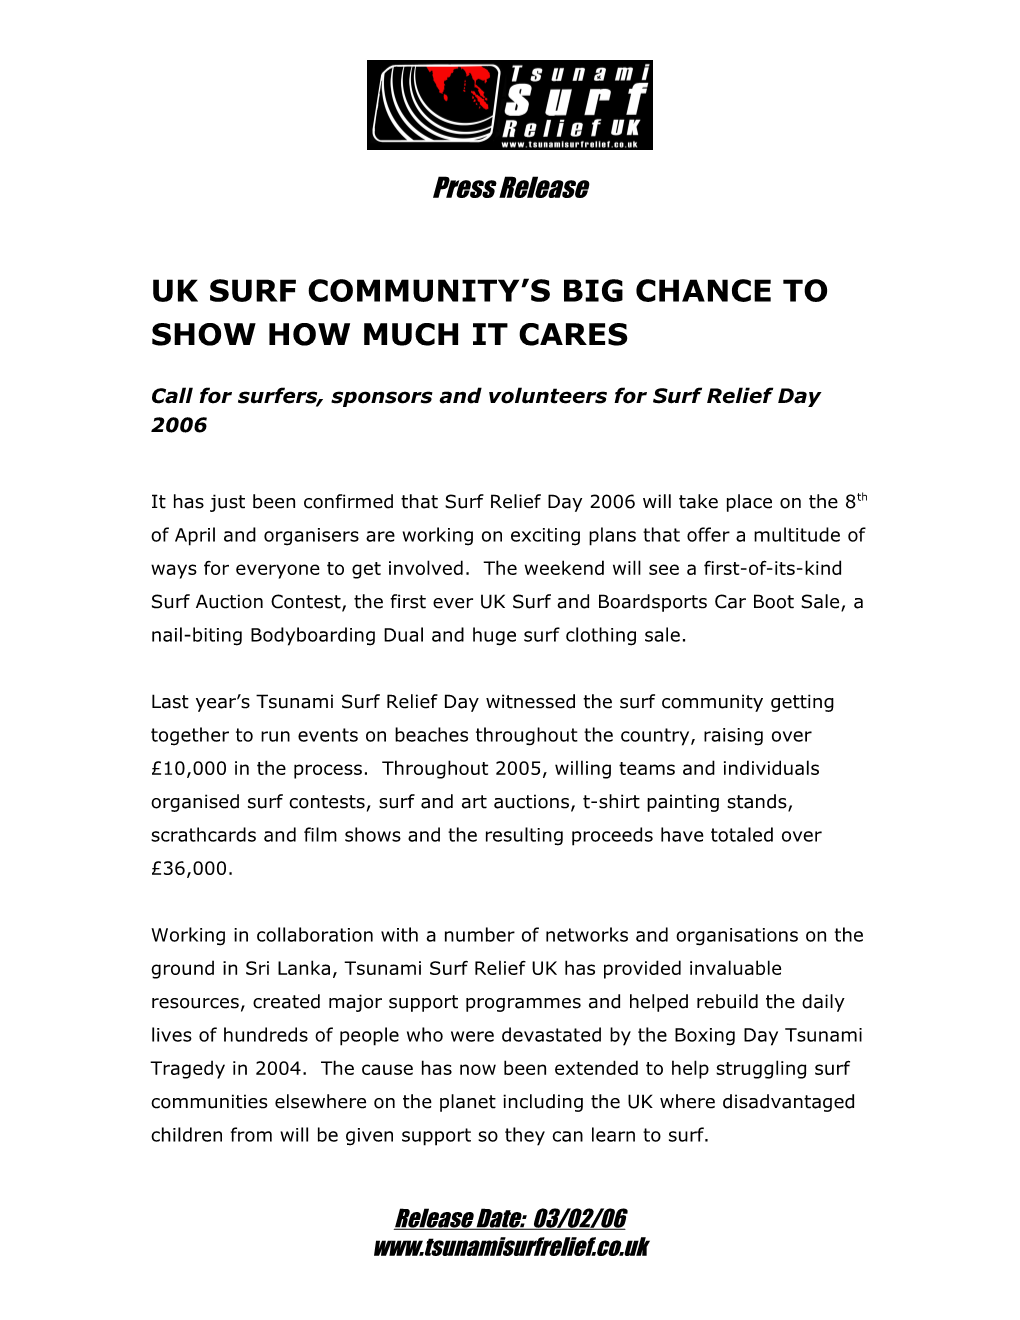 Uk Surf Industry S Big Chance to Show How Much They Care